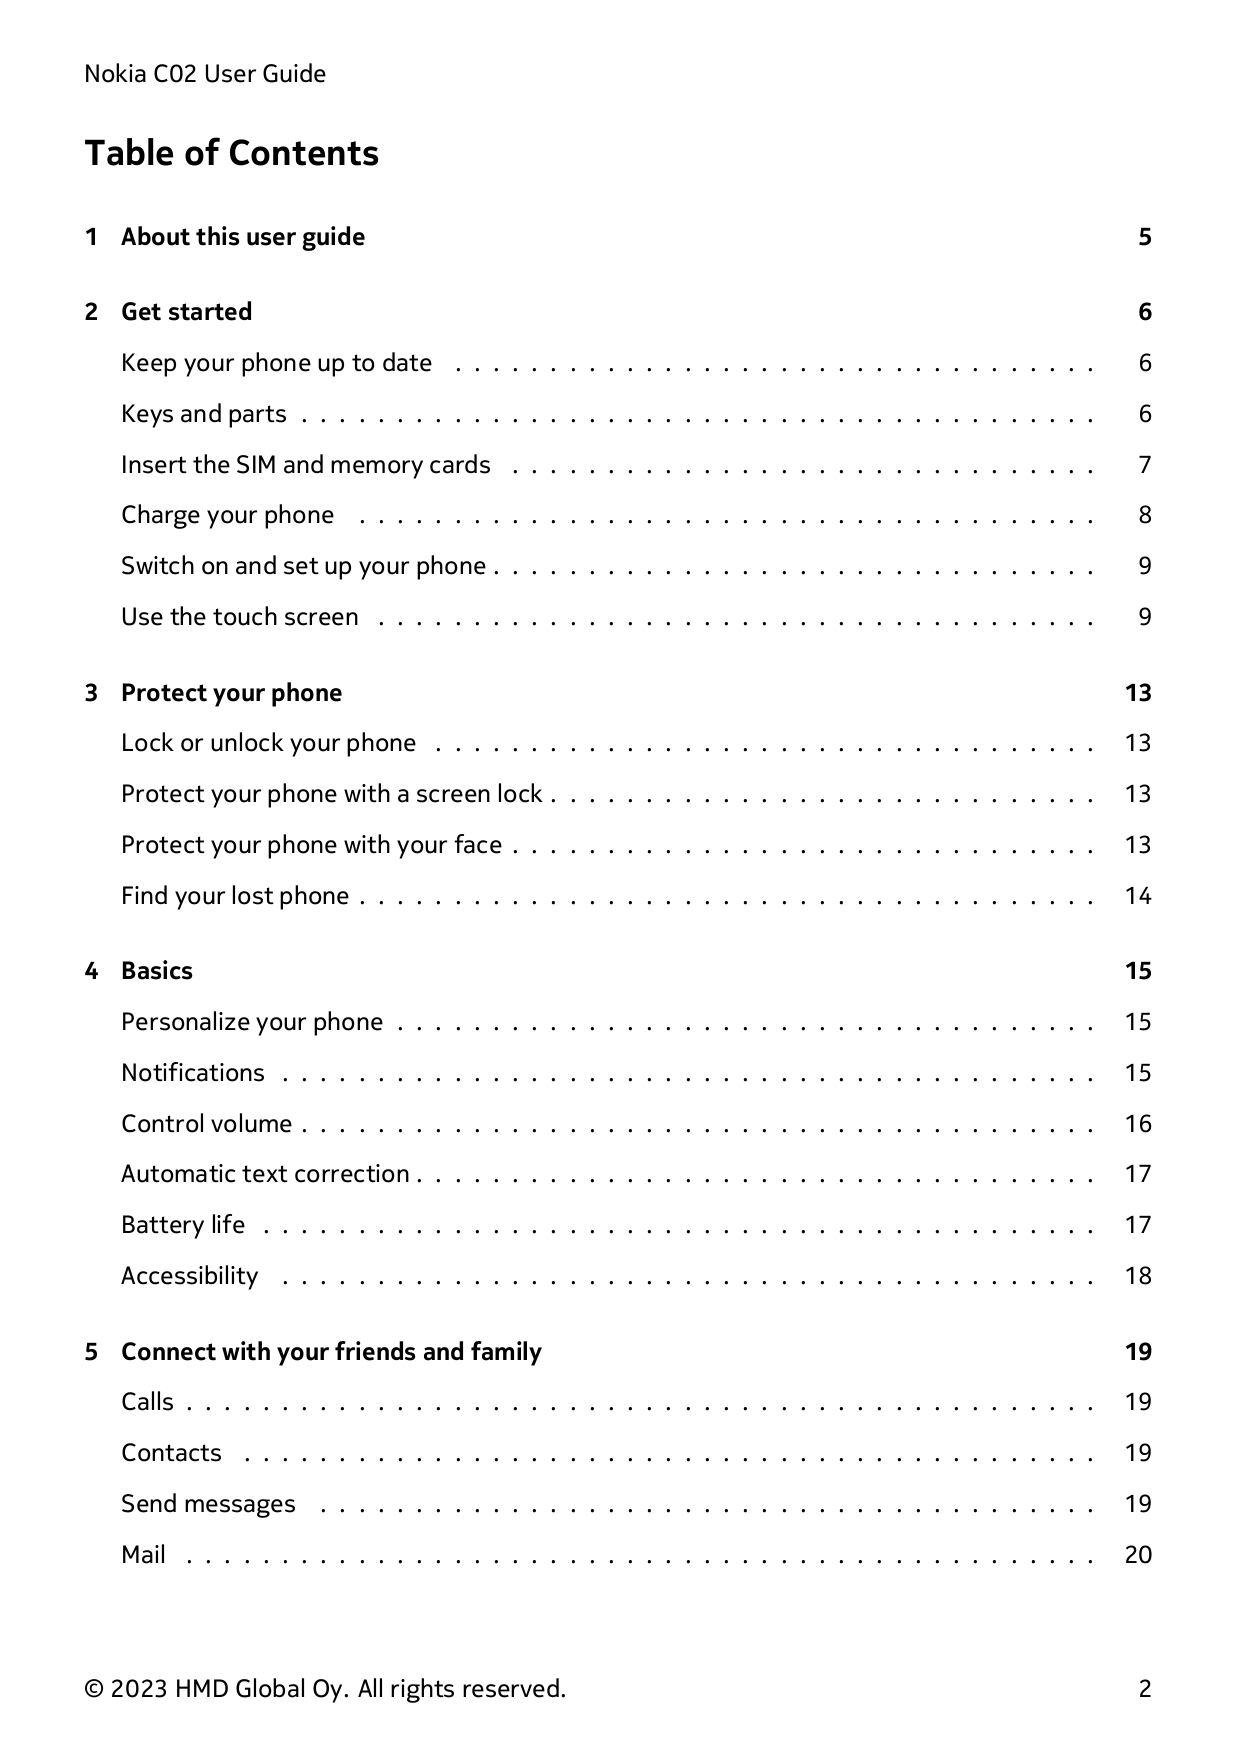 Nokia C02 User GuideTable of Contents1 About this user guide52 Get started6Keep your phone up to date . . . . . . . . . . . . . 